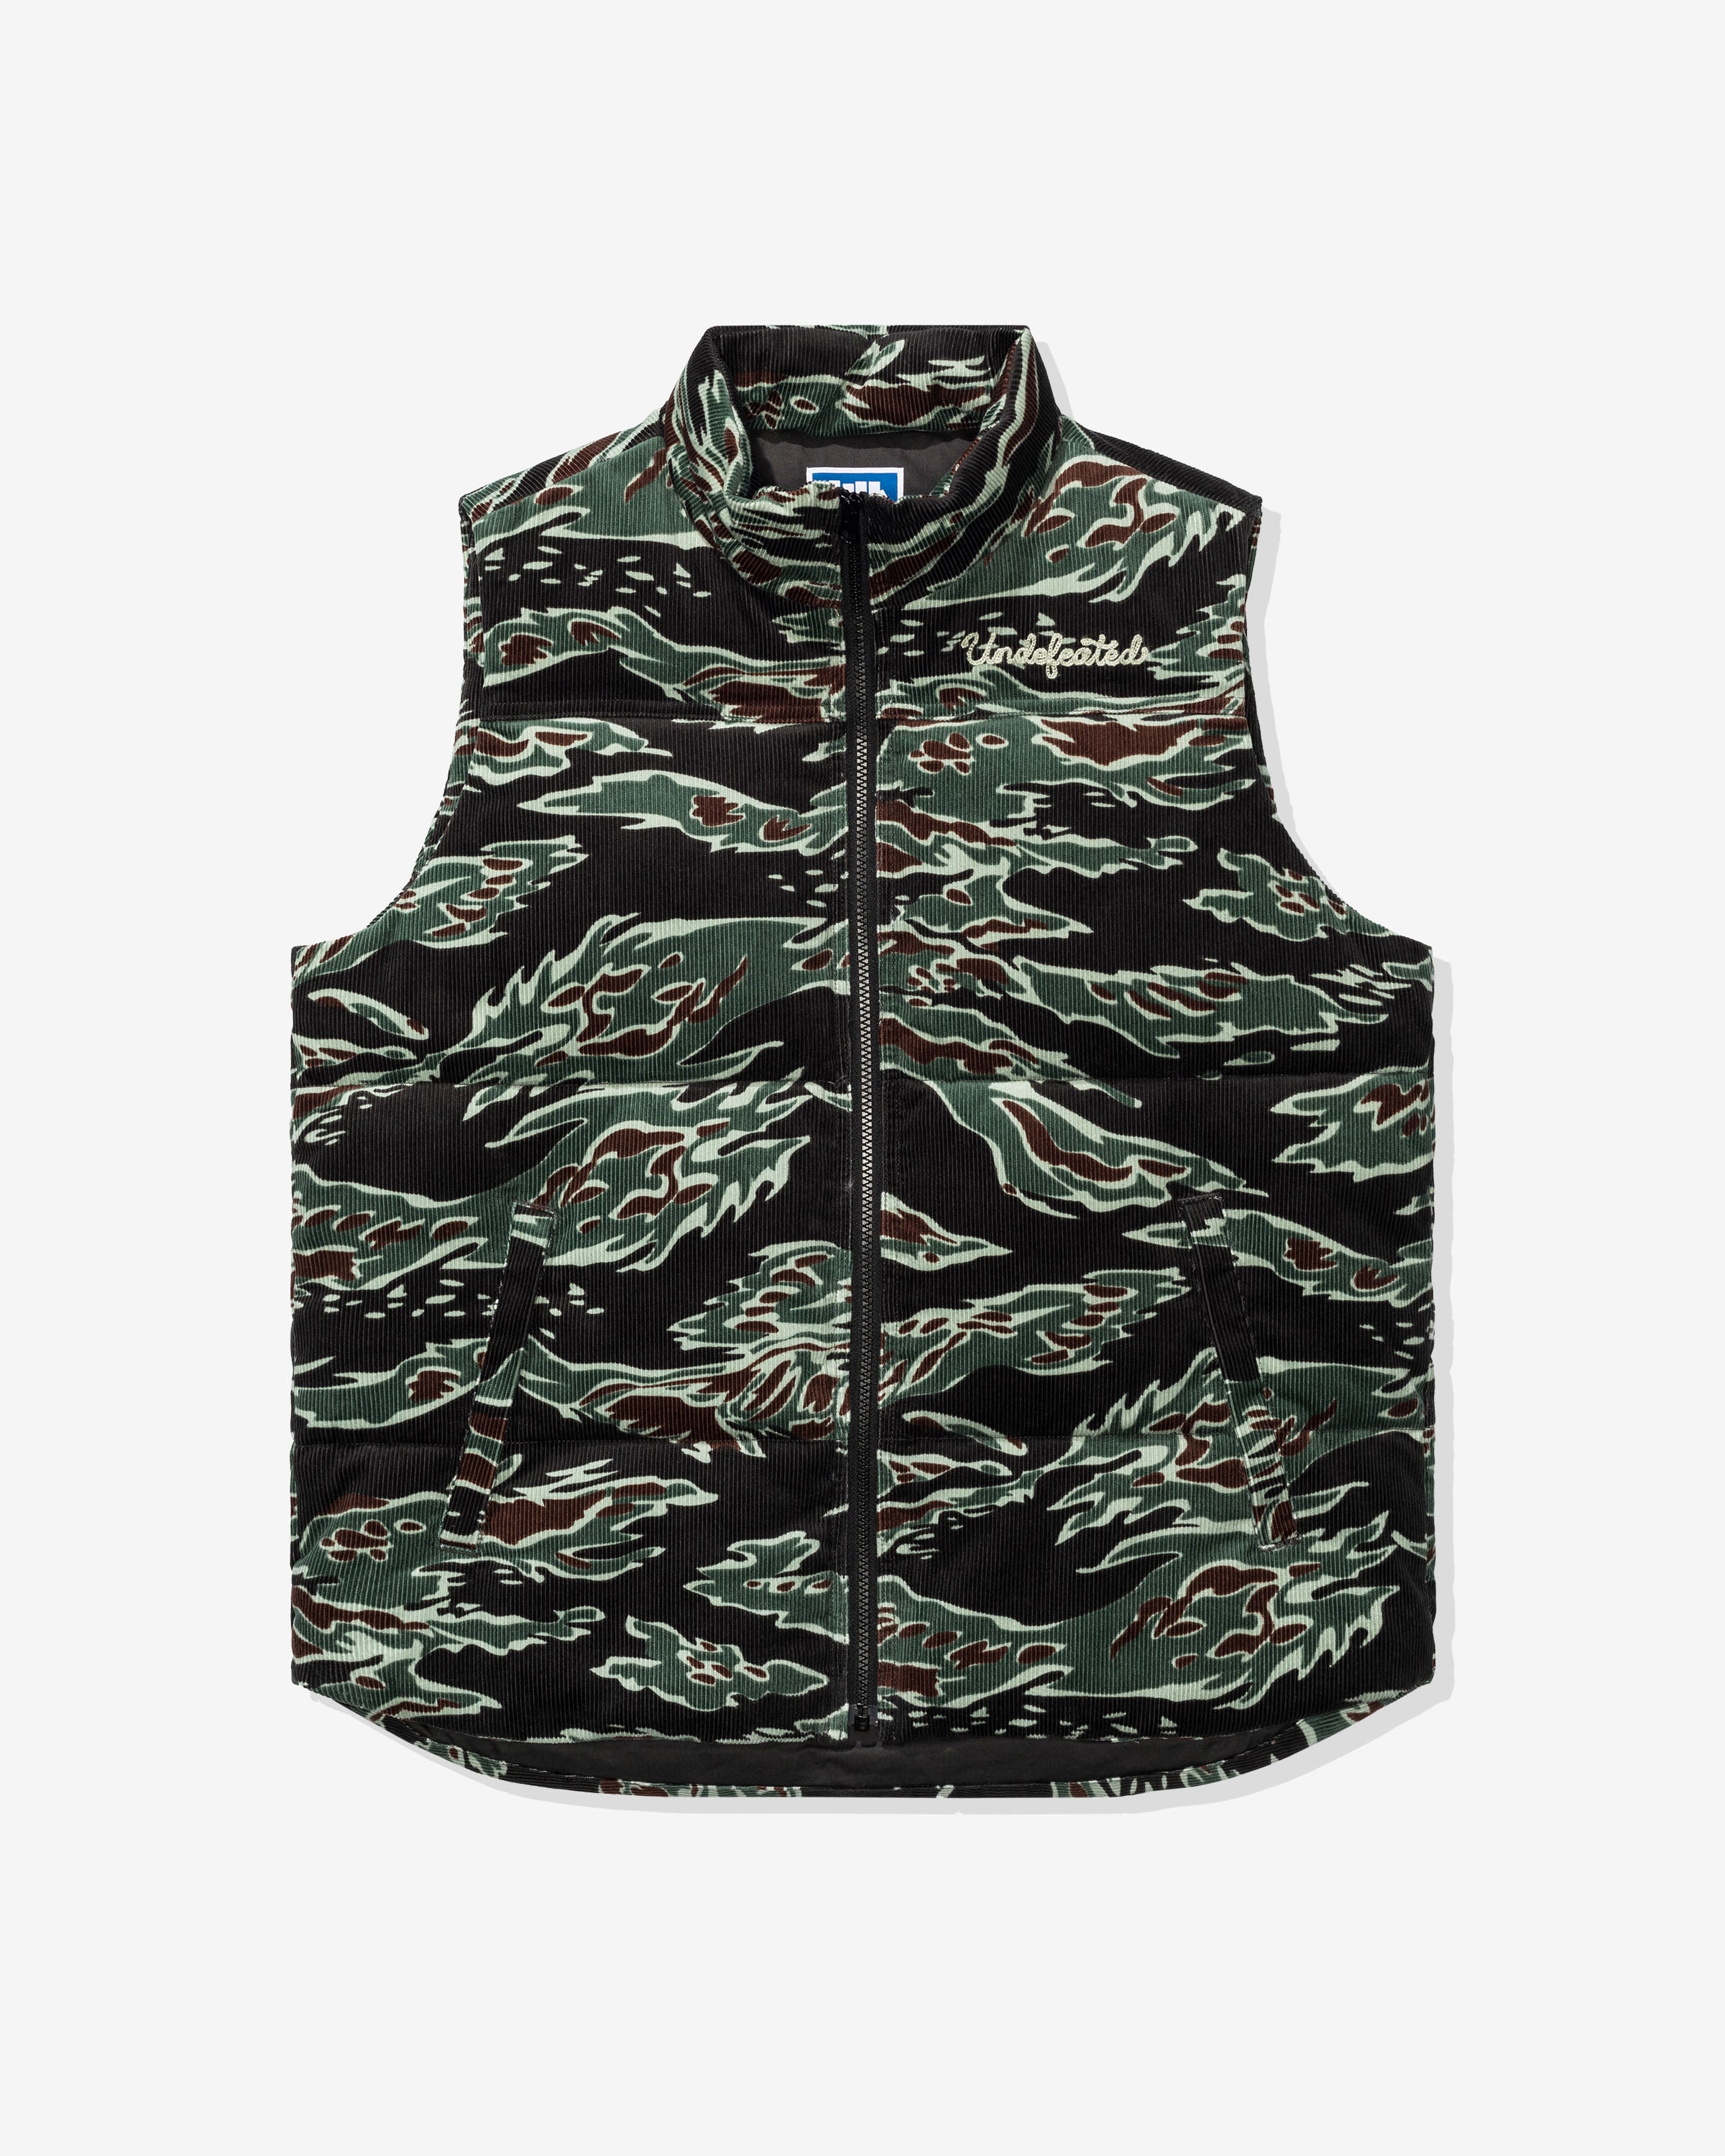 UNDEFEATED CORD VEST